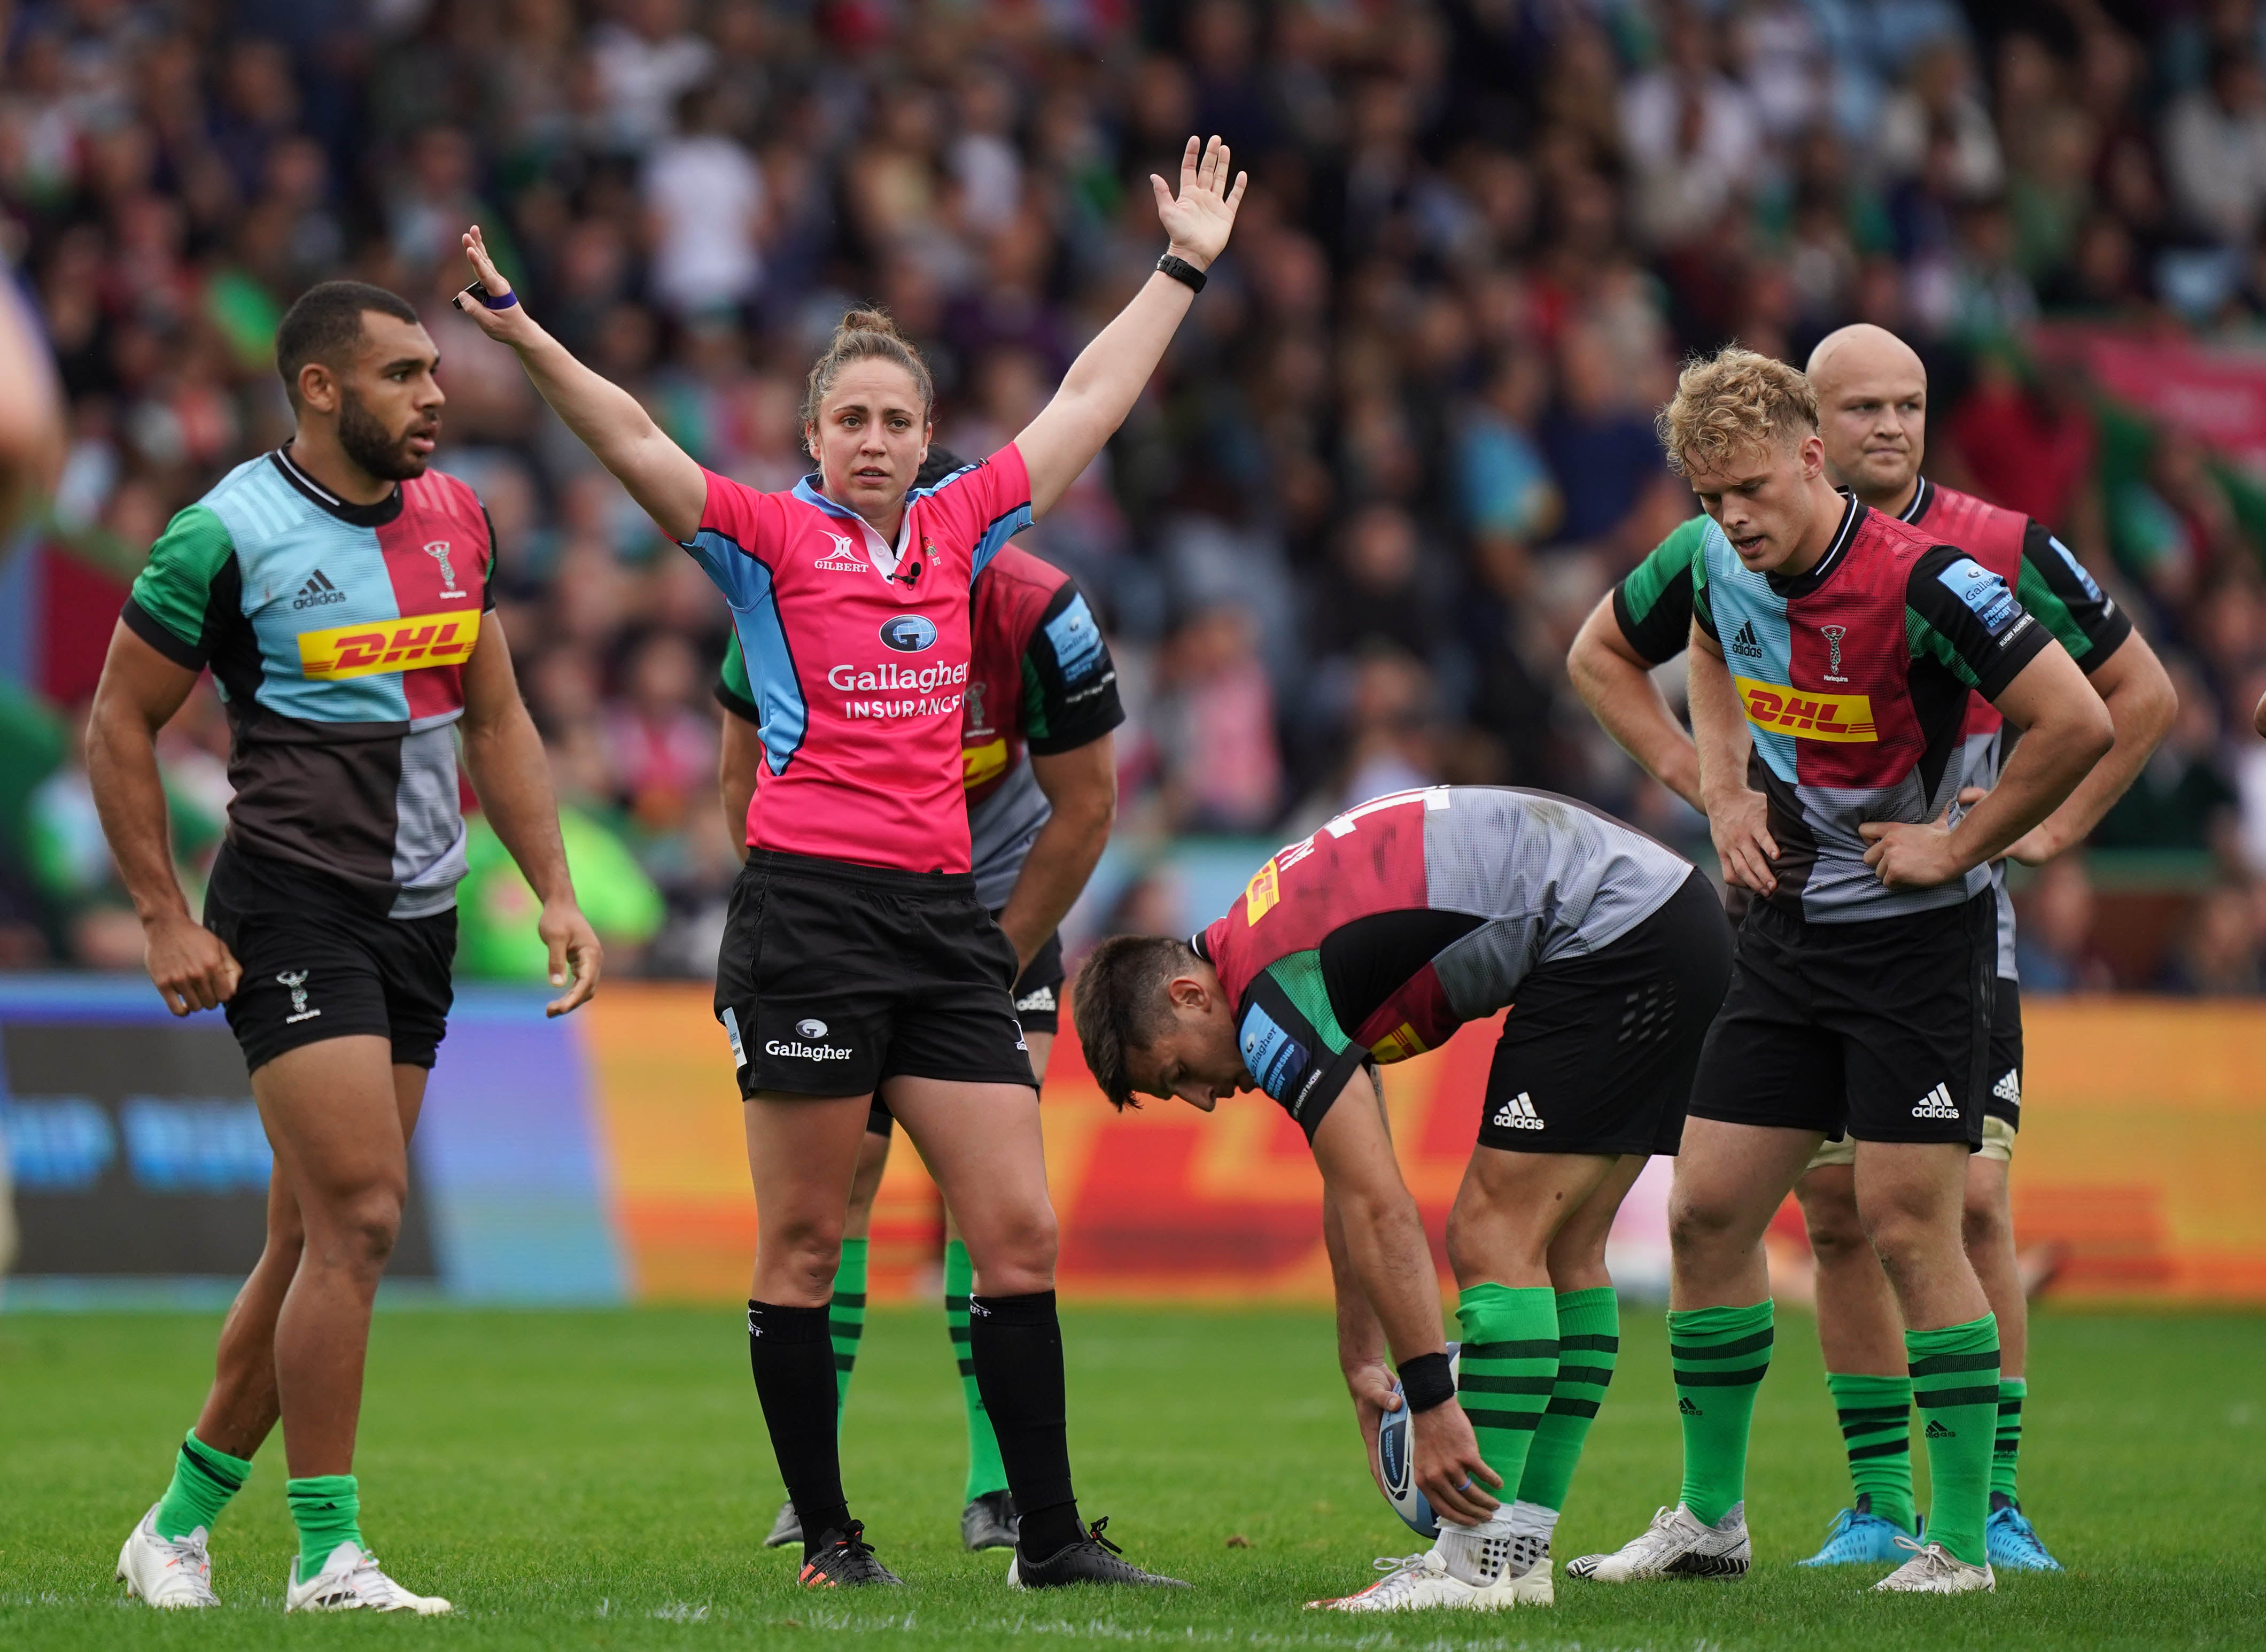 Sara Cox (centre) became the first woman to referee a Premiership rugby match when she took charge of Harlequins’ clash with Worcester (Kirsty O’Connor/PA)